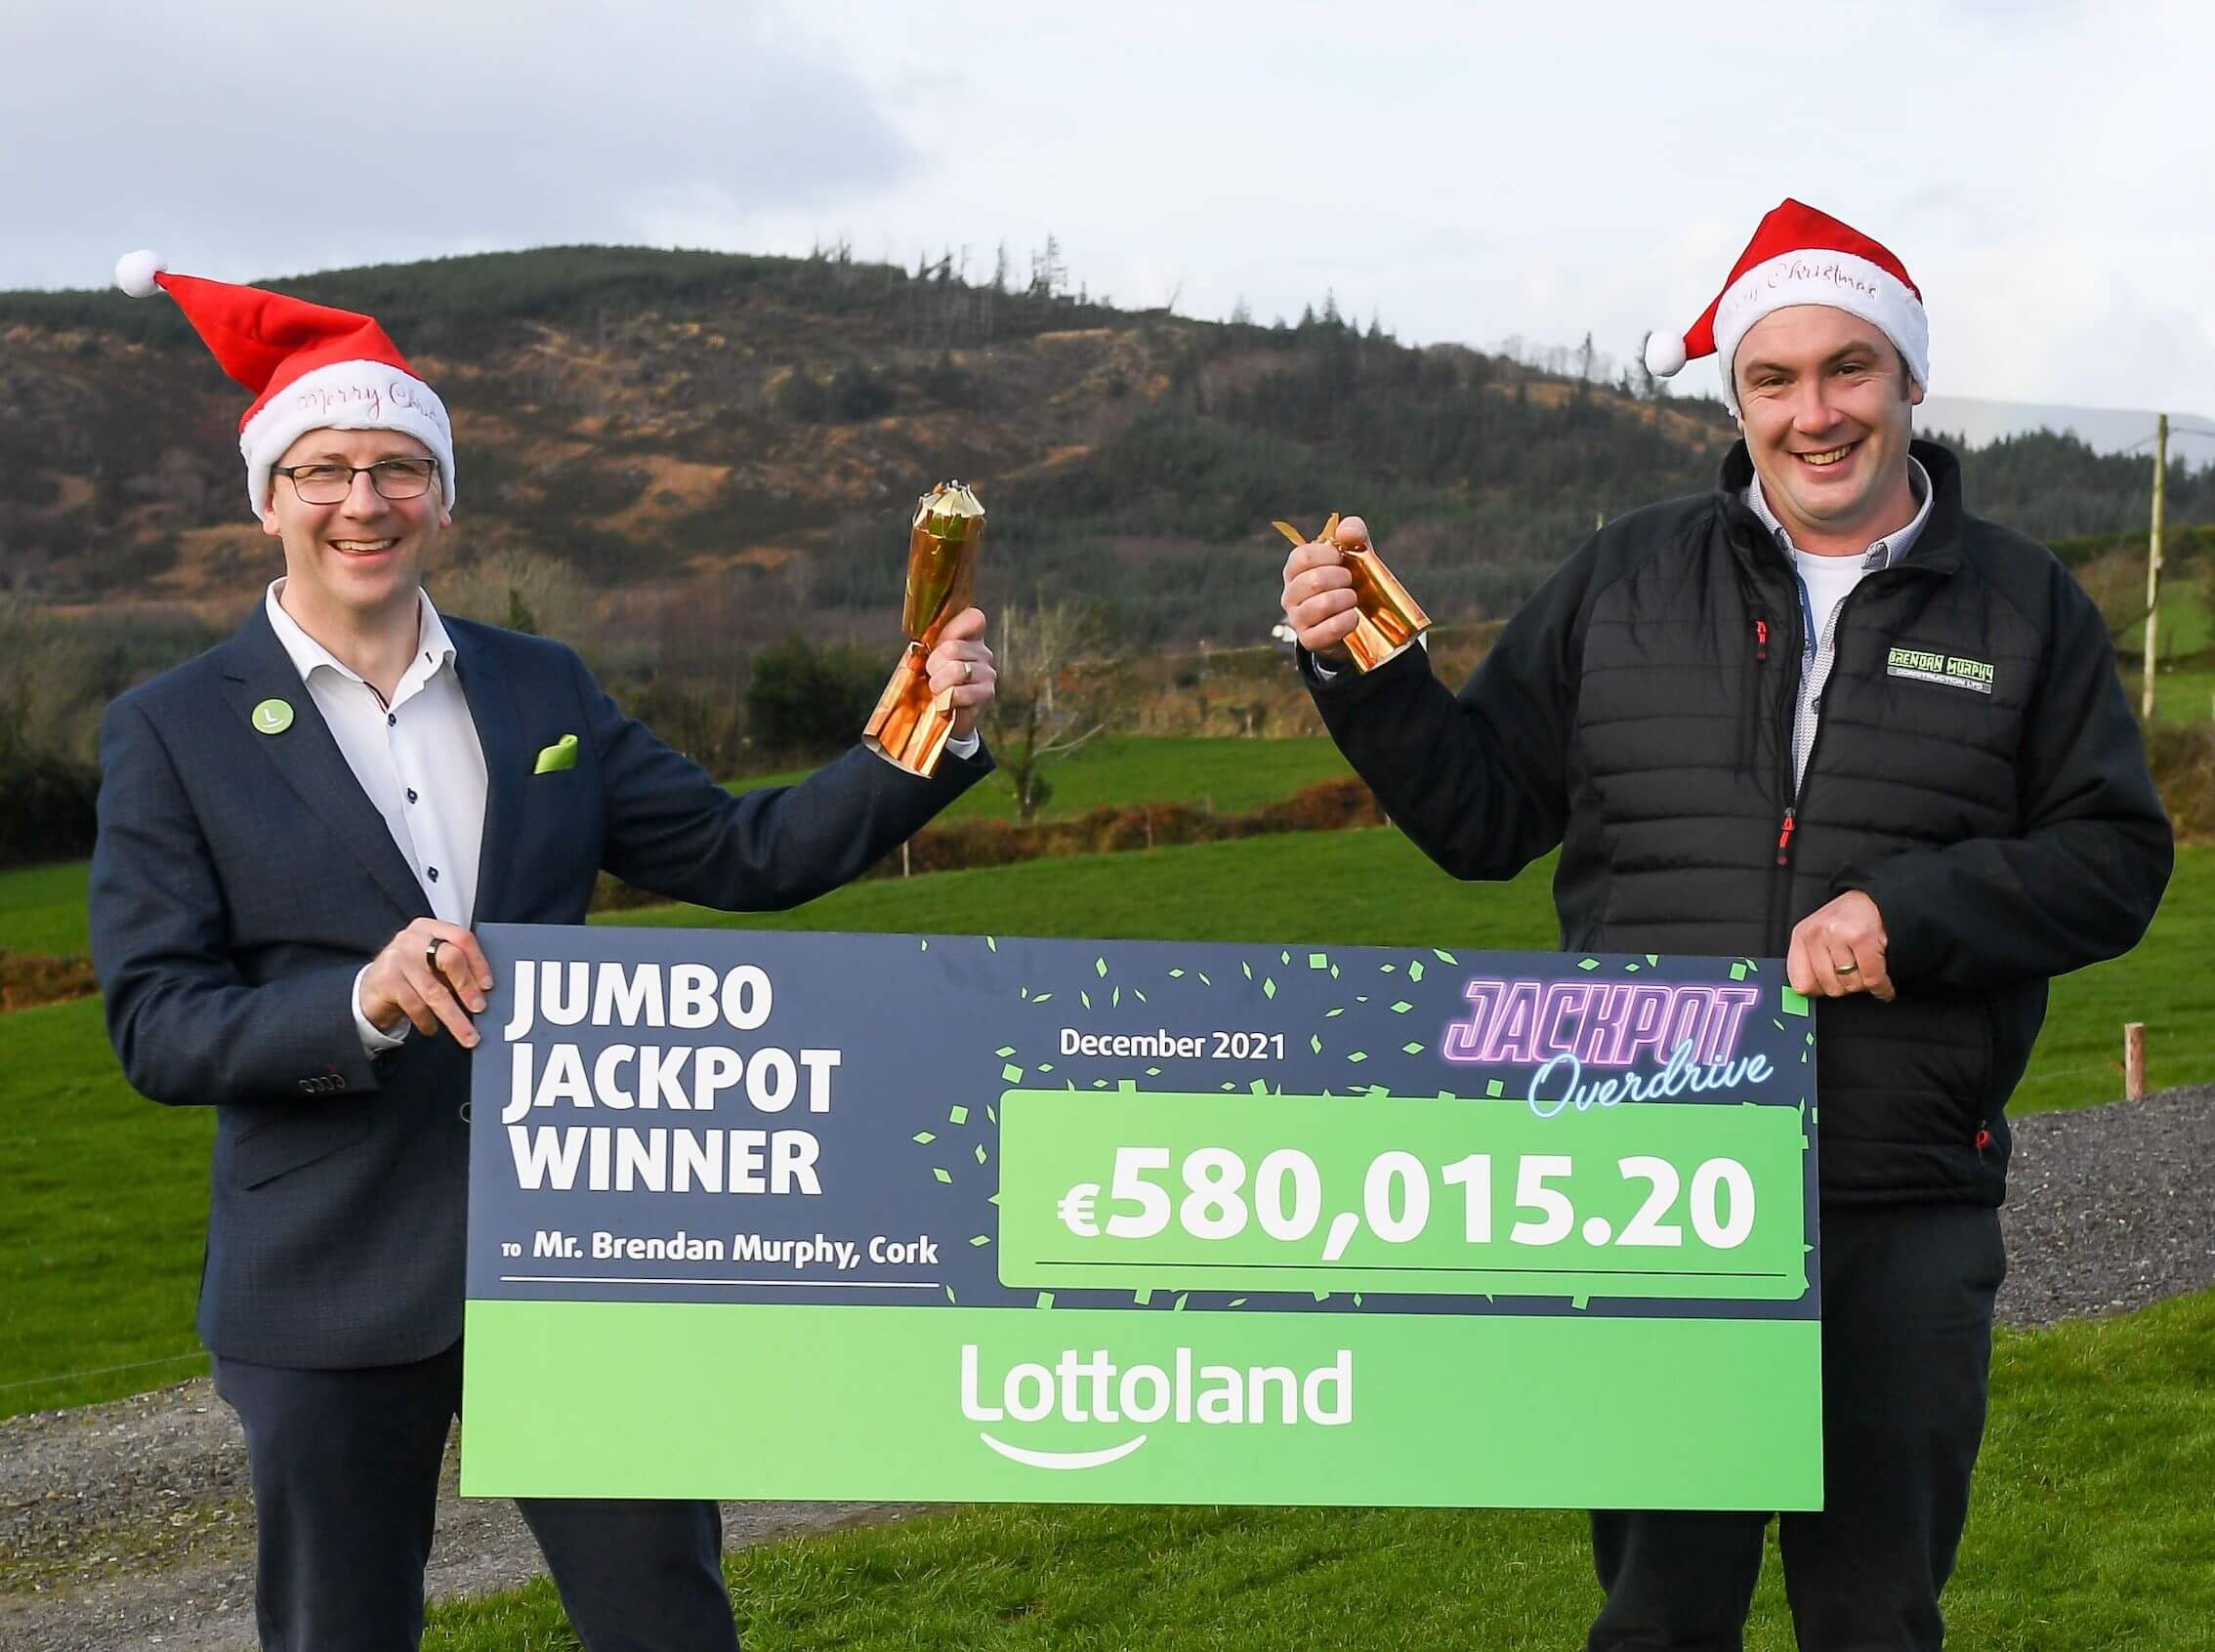 Lottoland winner Brendan Murphy being presented with a cheque for jackpot win by Graham Ross of Lottoland